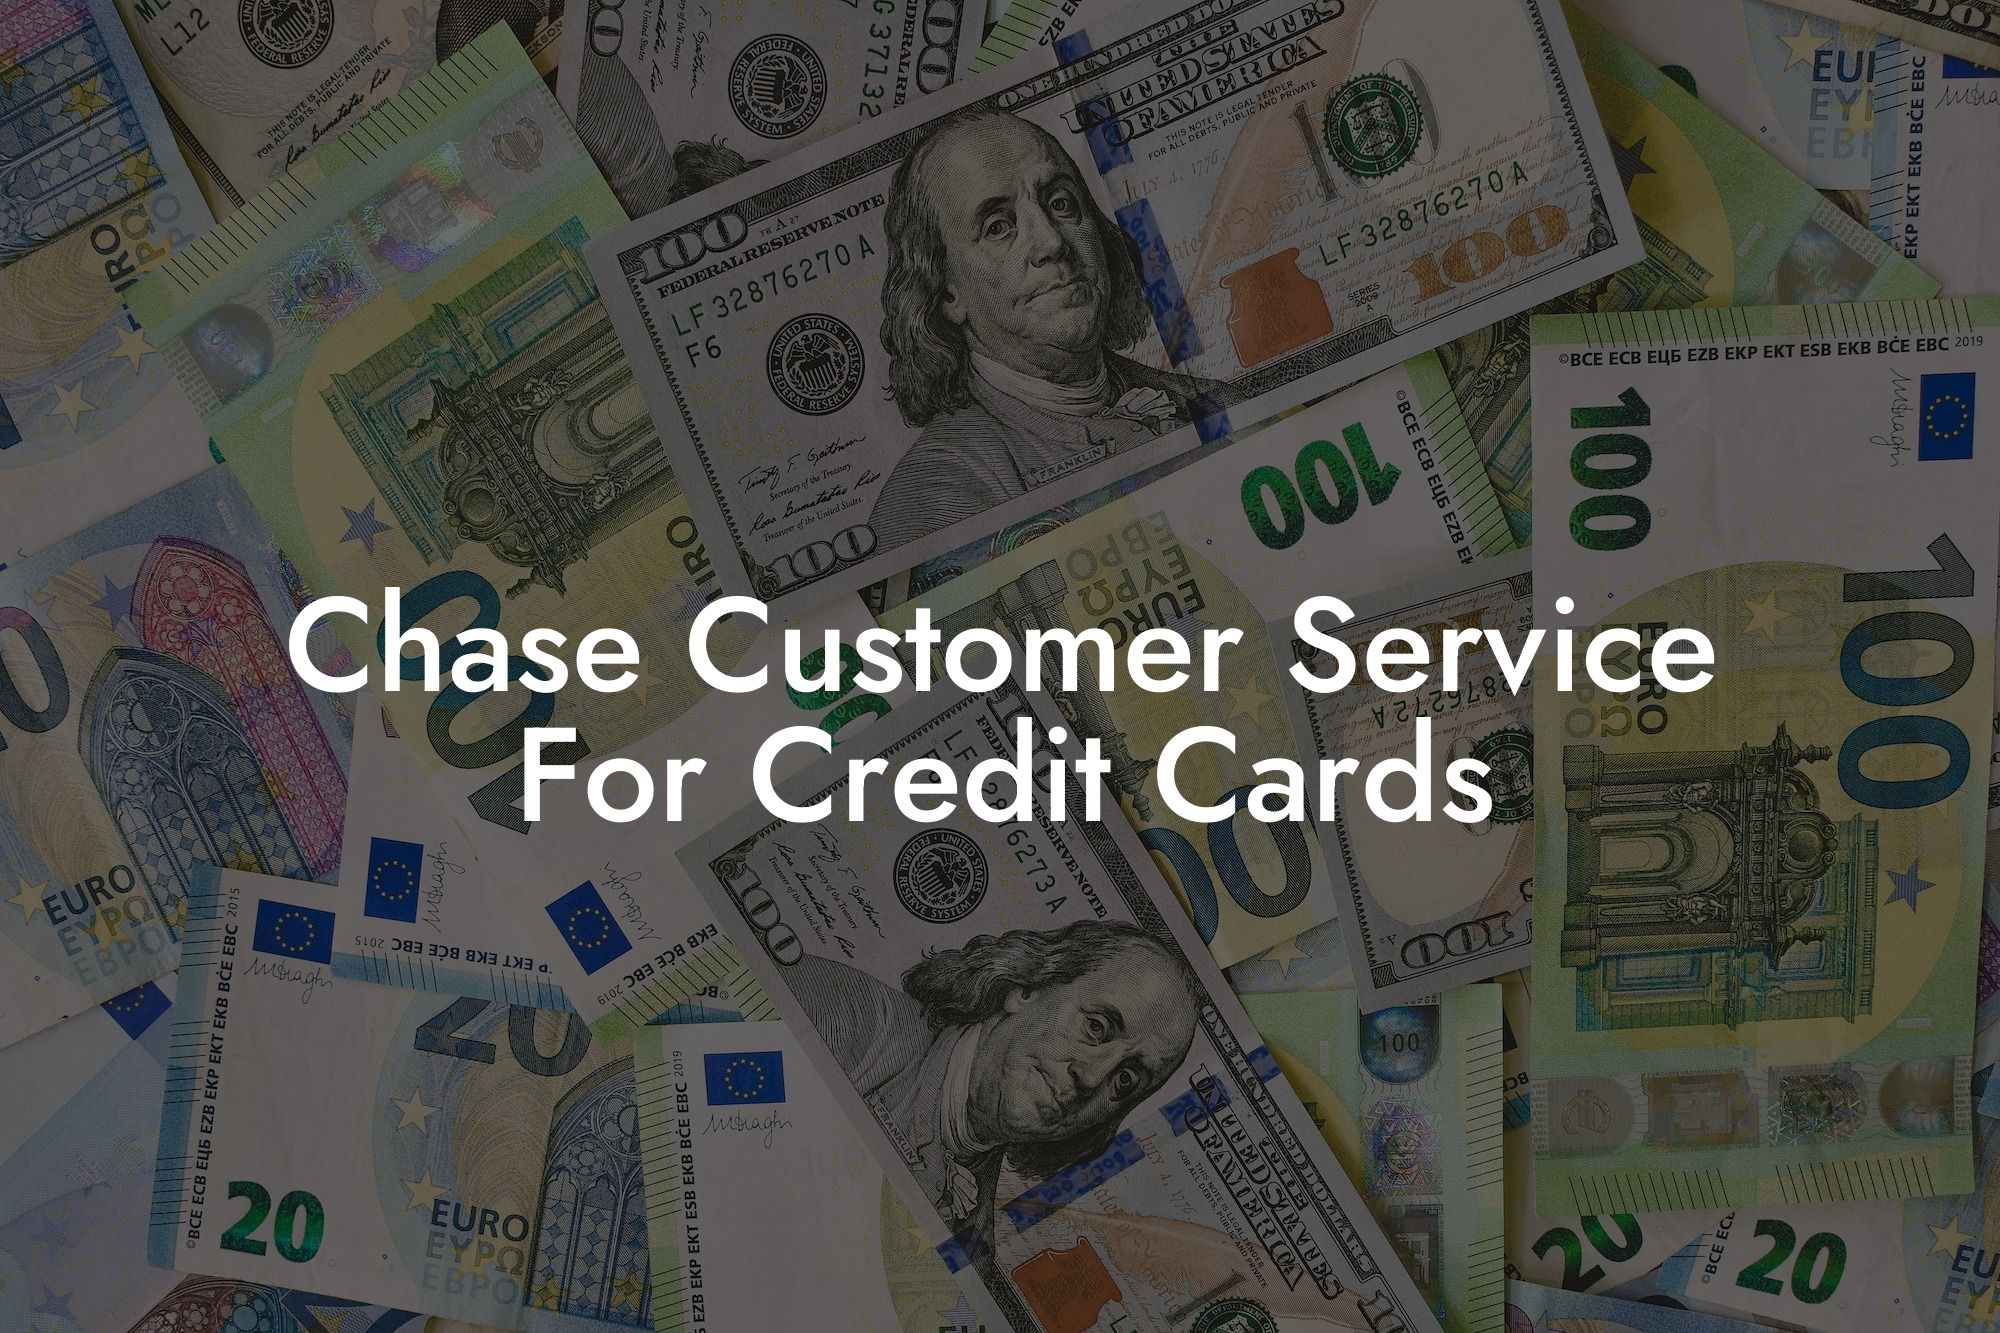 Chase Customer Service For Credit Cards